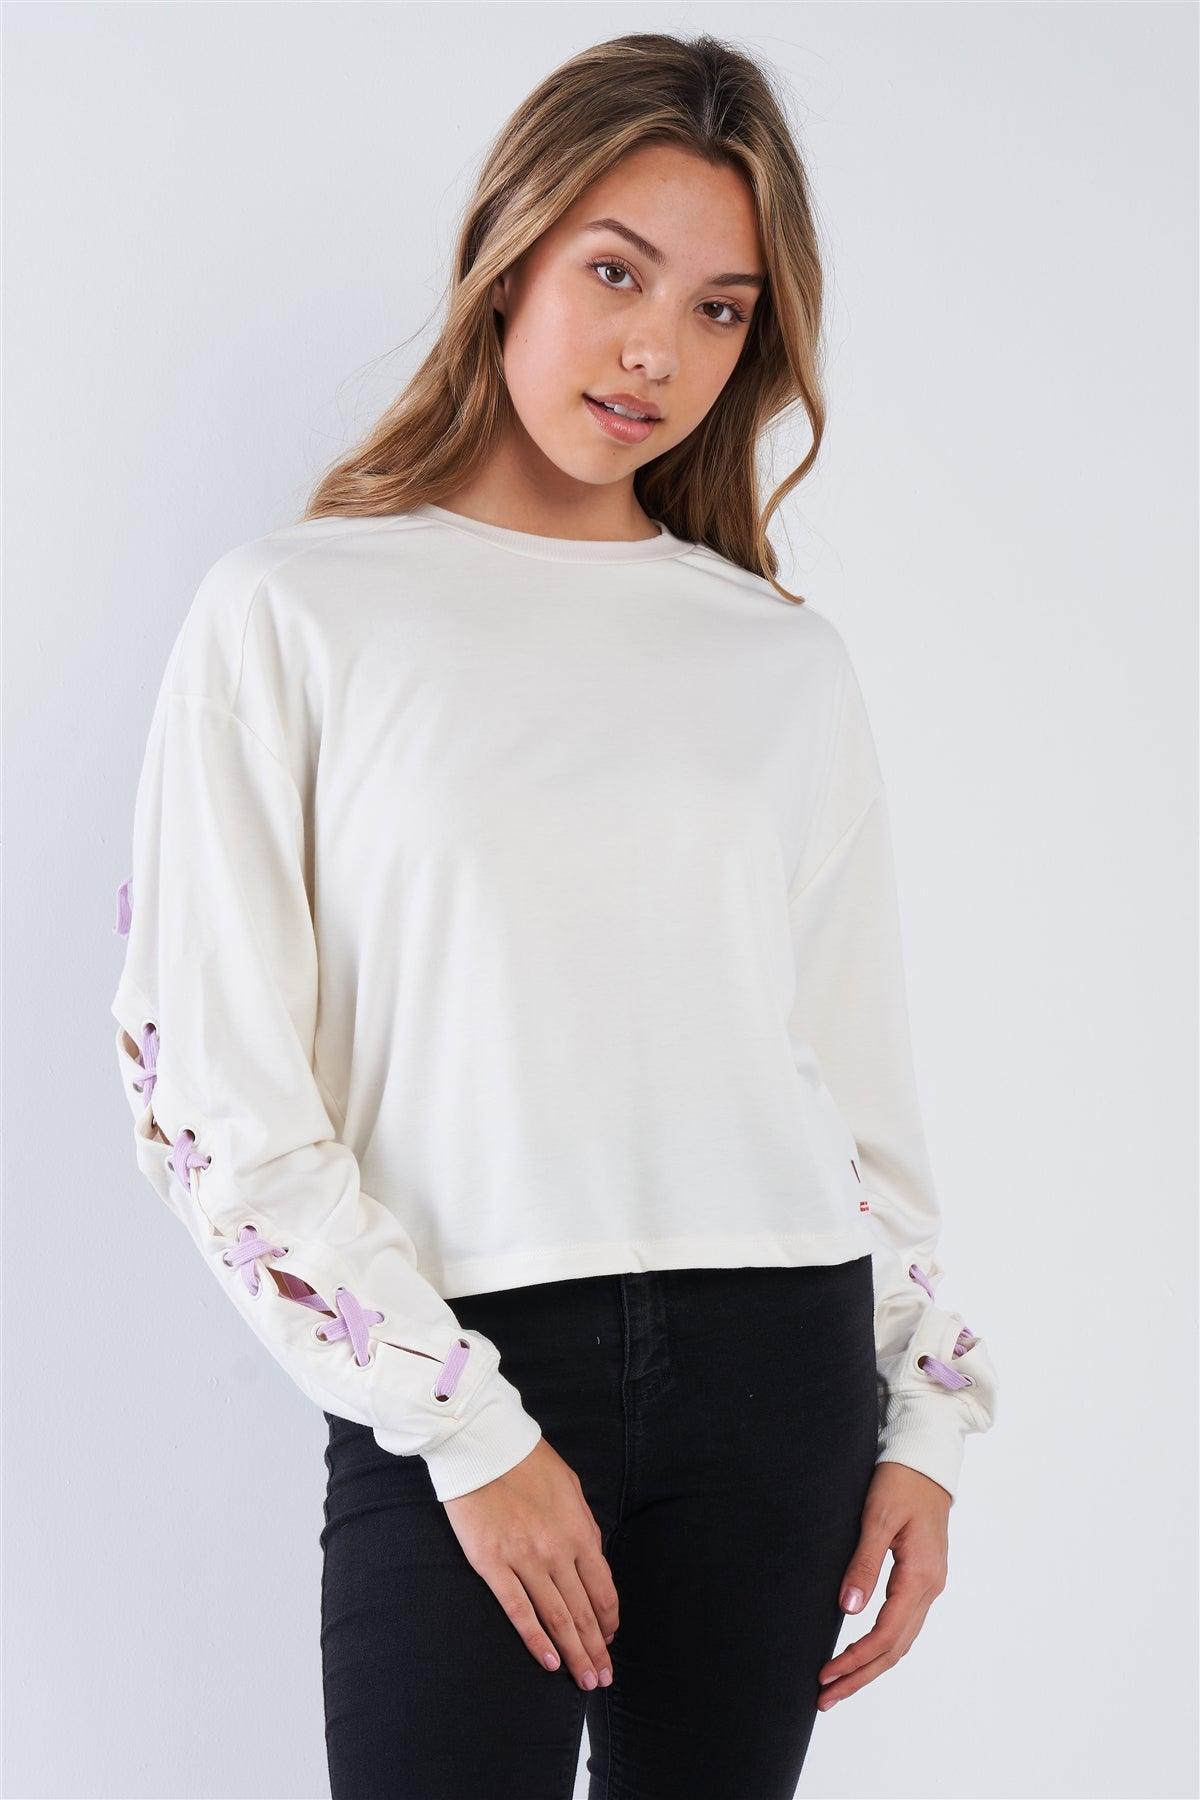 Pristine Long Sleeve "GRL POWER" Lace-Up Sleeve Pullover Top